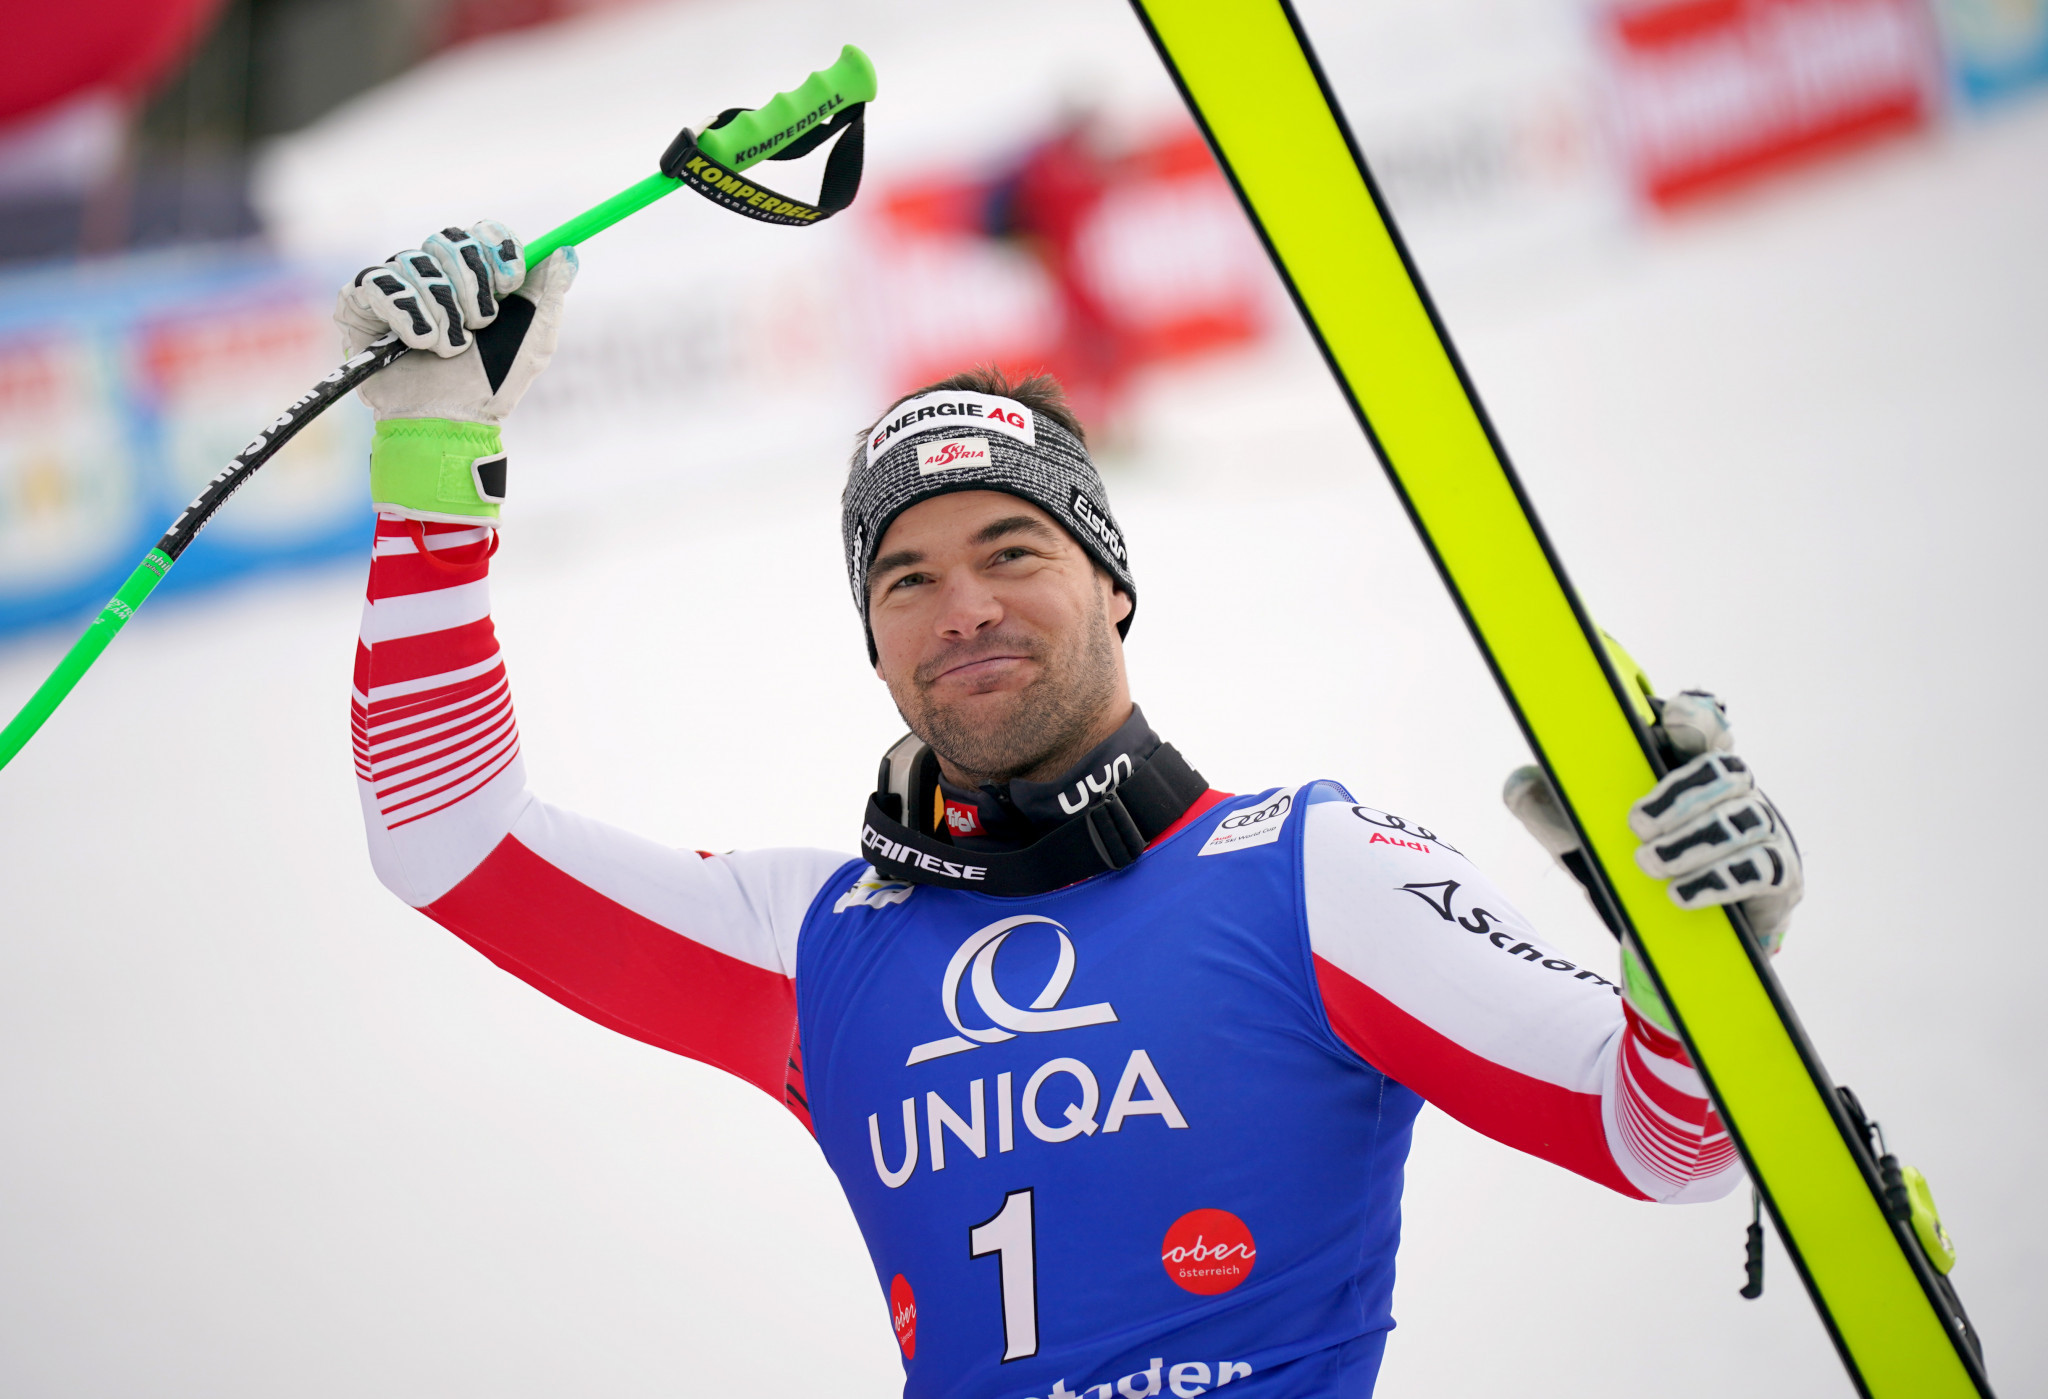 Kriechmayr delights home crowd with victory in FIS Alpine Skiing World Cup in Hinterstoder 